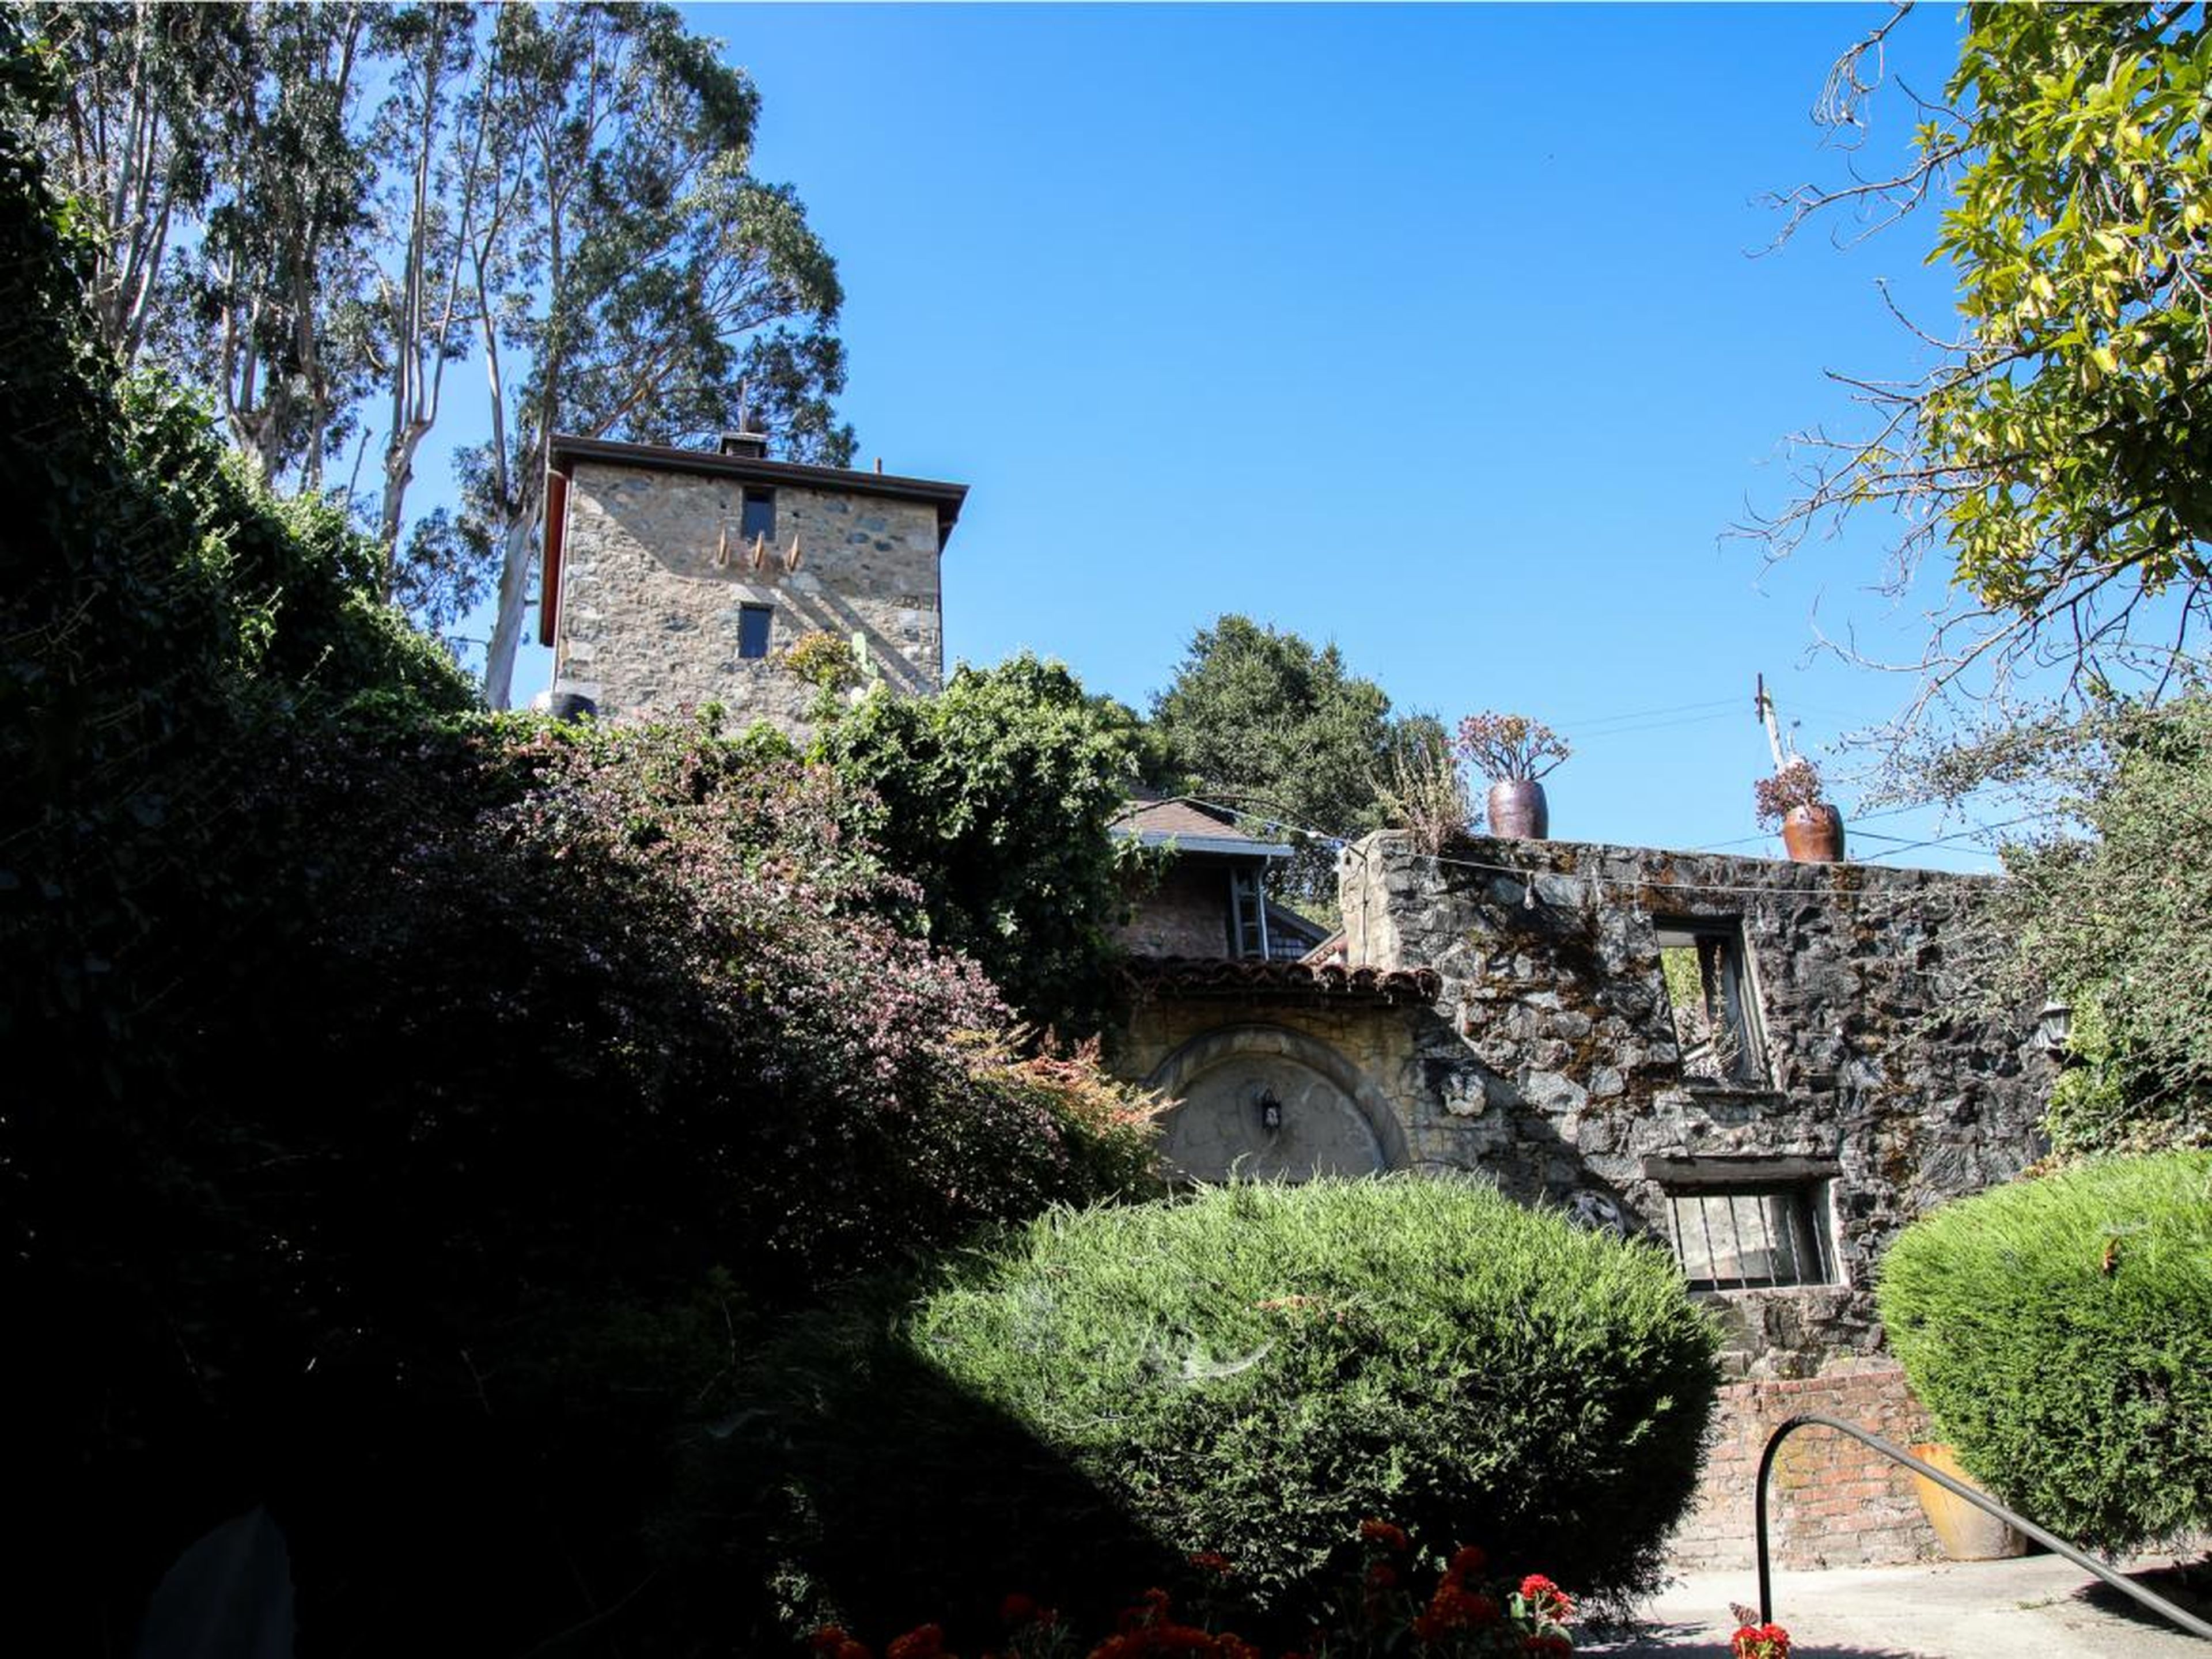 The current owners, the Gilbert family, bought the castle in 2012 for $900,000, Jennifer Gilbert told Business Insider.